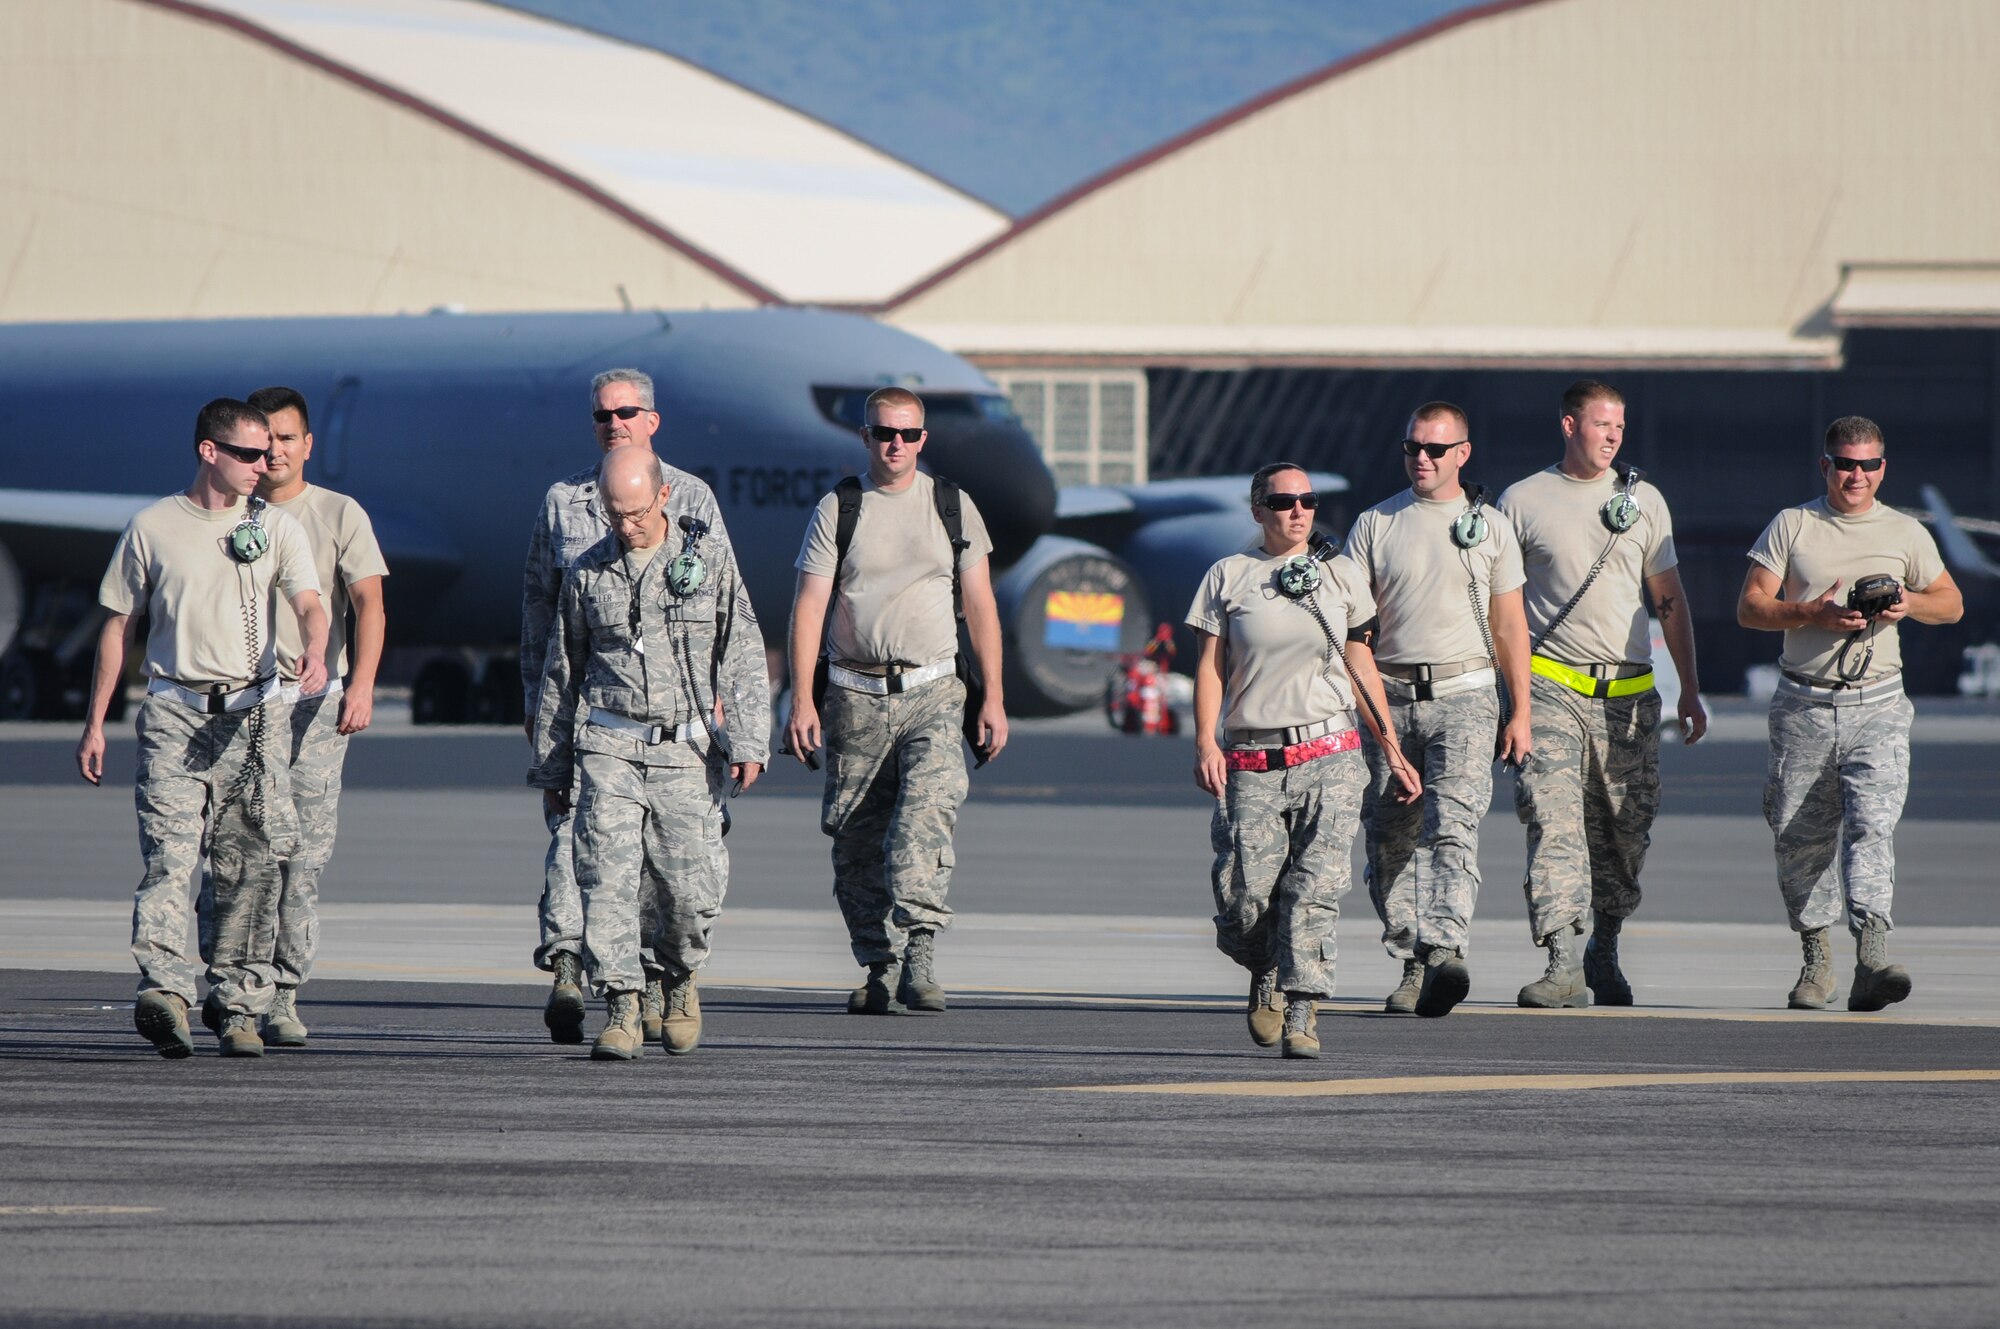 Maintenance reservists from the 513th Air Control Group at Tinker Air Force Base, Oklahoma, walk off the flight line after launching an E-3 Sentry Airborne Warning and Control System aircraft July 24 at Joint Base Pearl Harbor-Hickam, Hawaii. More than 60 reservists from the 513th Air Control Group traveled from Tinker to participate in the Rim of the Pacific, or RIMPAC, 2014 exercise, the world’s largest maritime exercise held biannually in and around the Hawaiian islands. (U.S. Air Force photo by Staff Sgt. Caleb Wanzer)